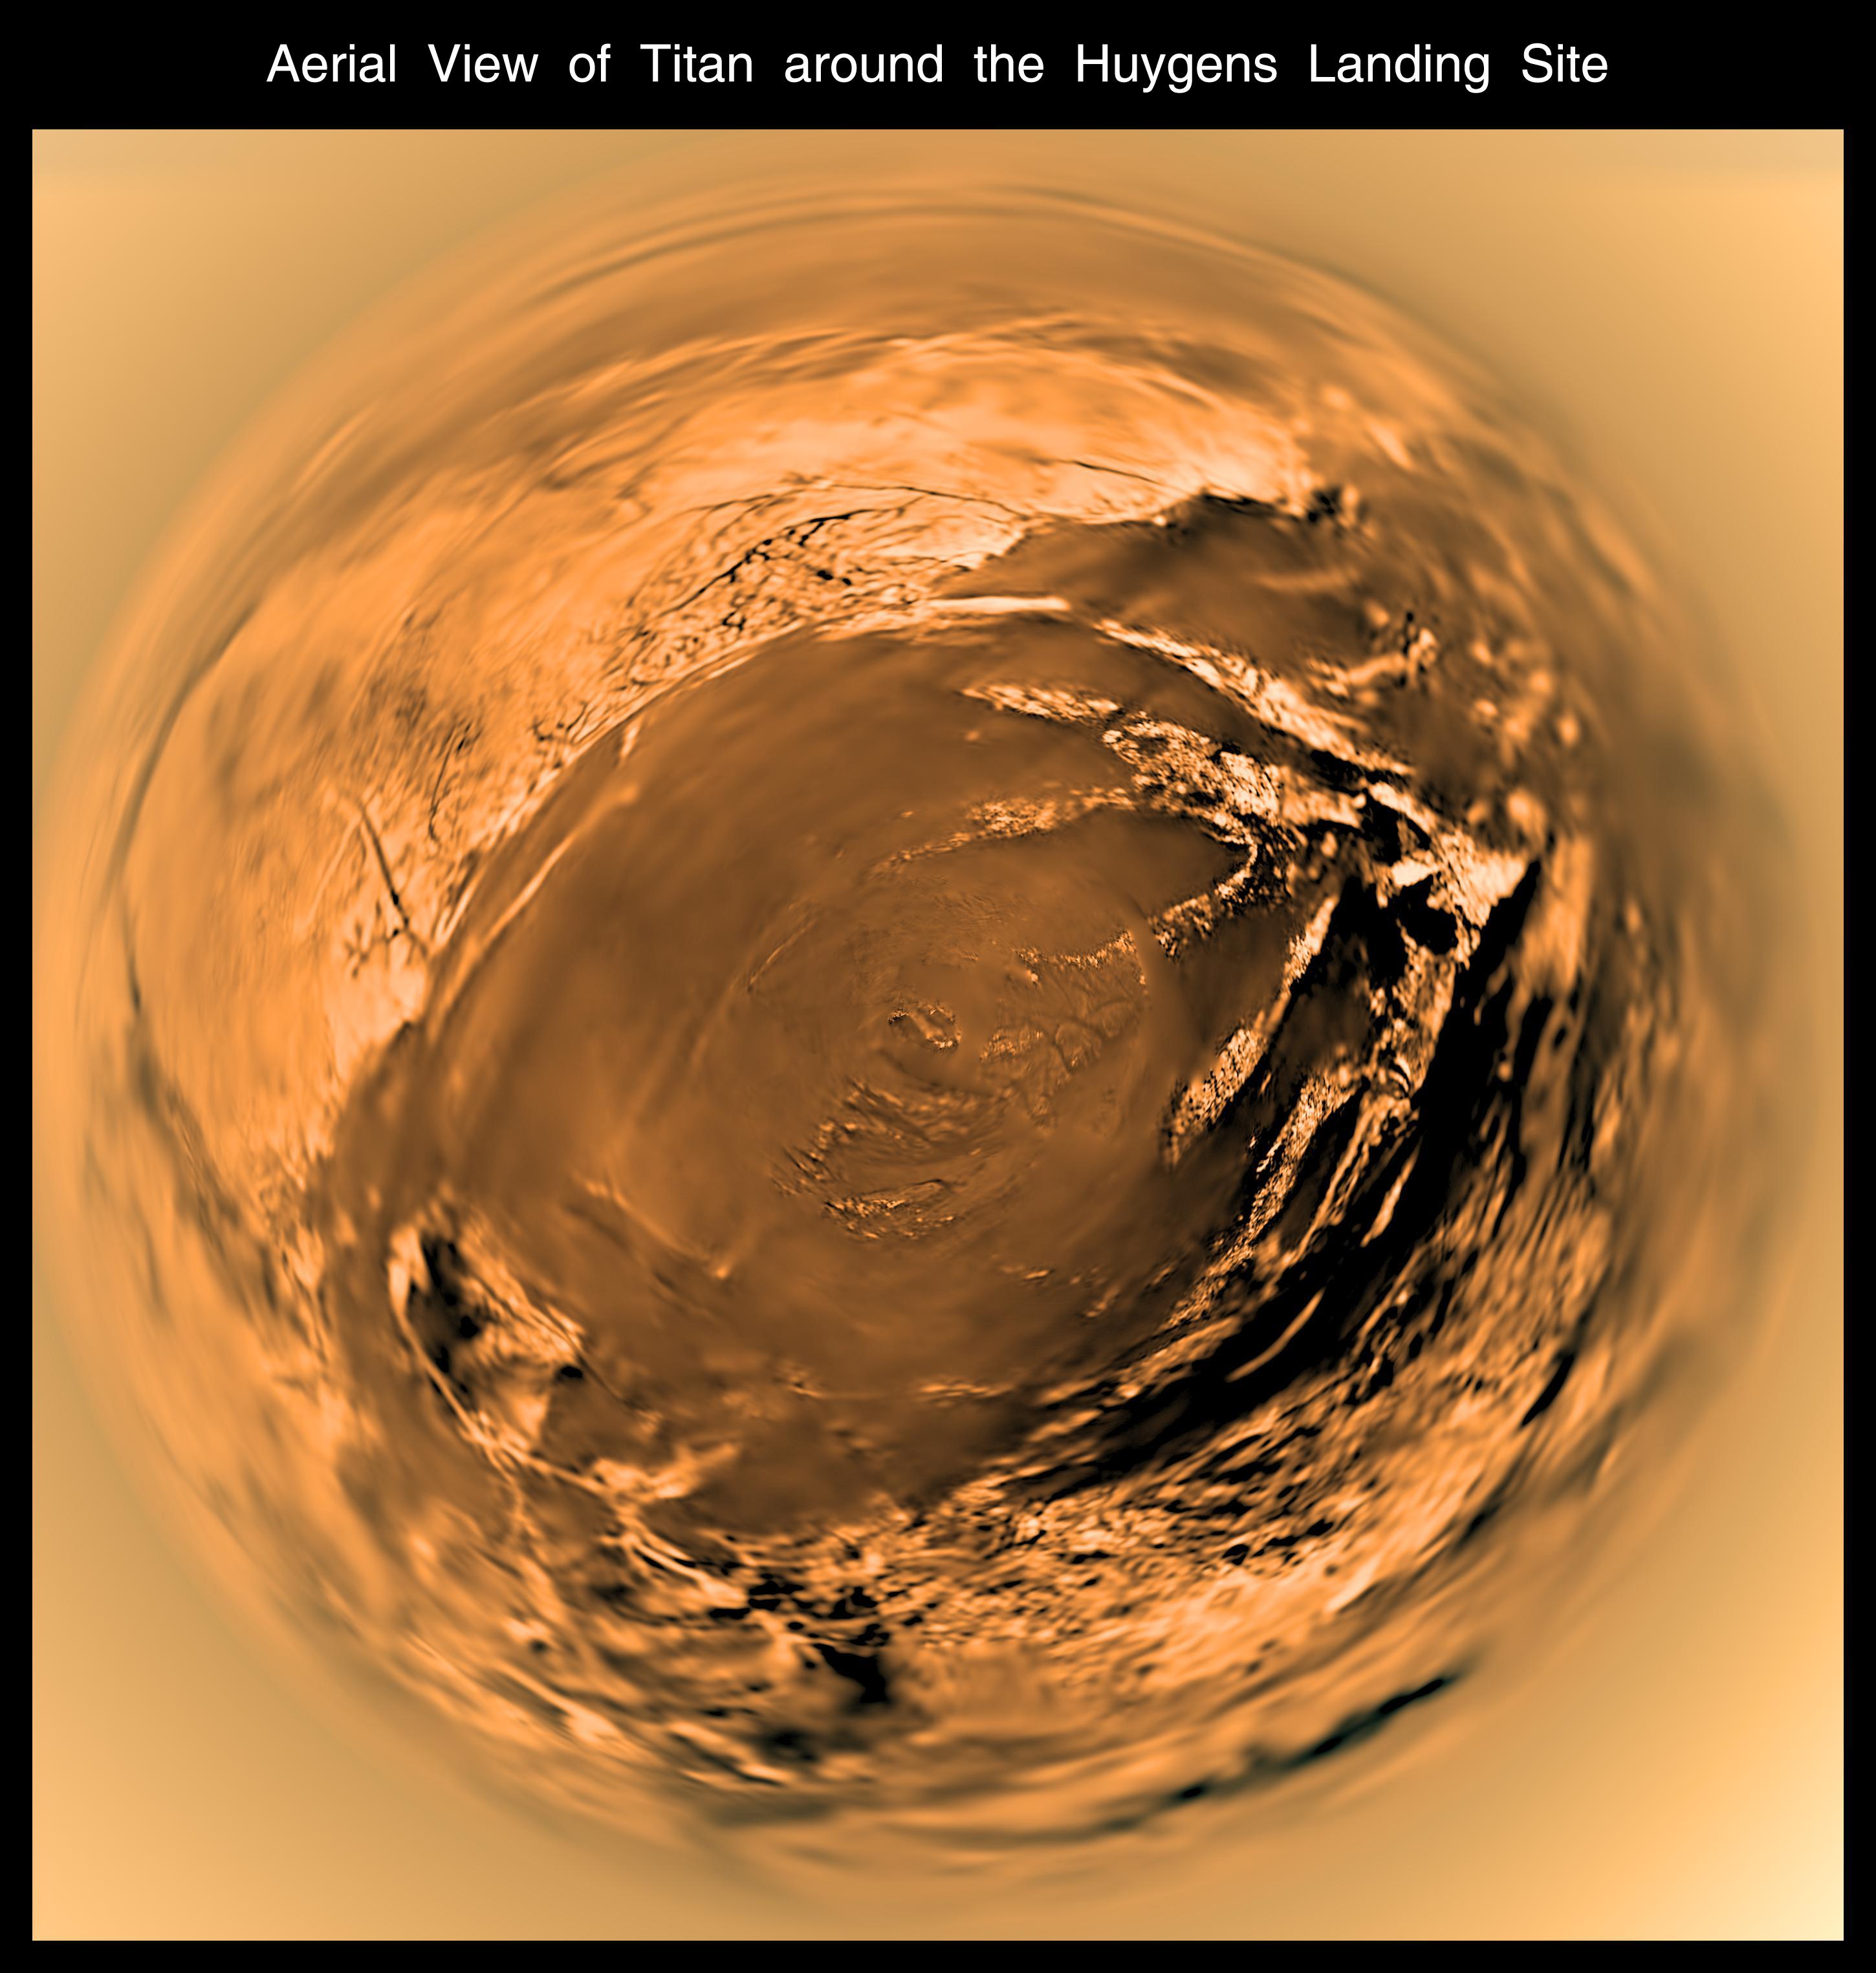 This poster shows a flattened (Mercator) projection of the Huygens probe's view